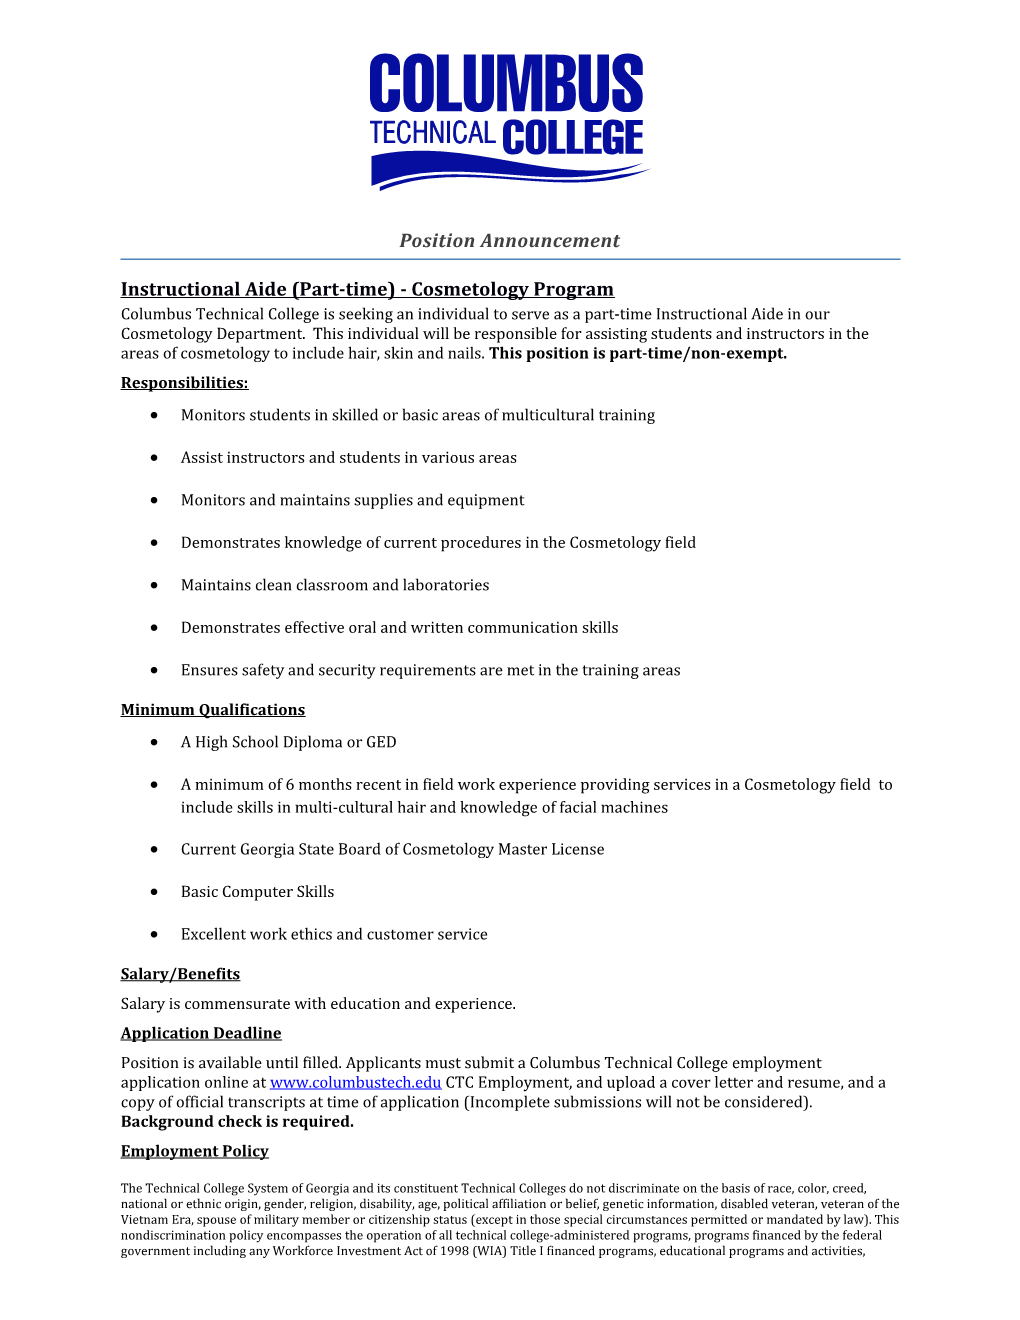 Instructional Aide (Part-Time) - Cosmetology Program